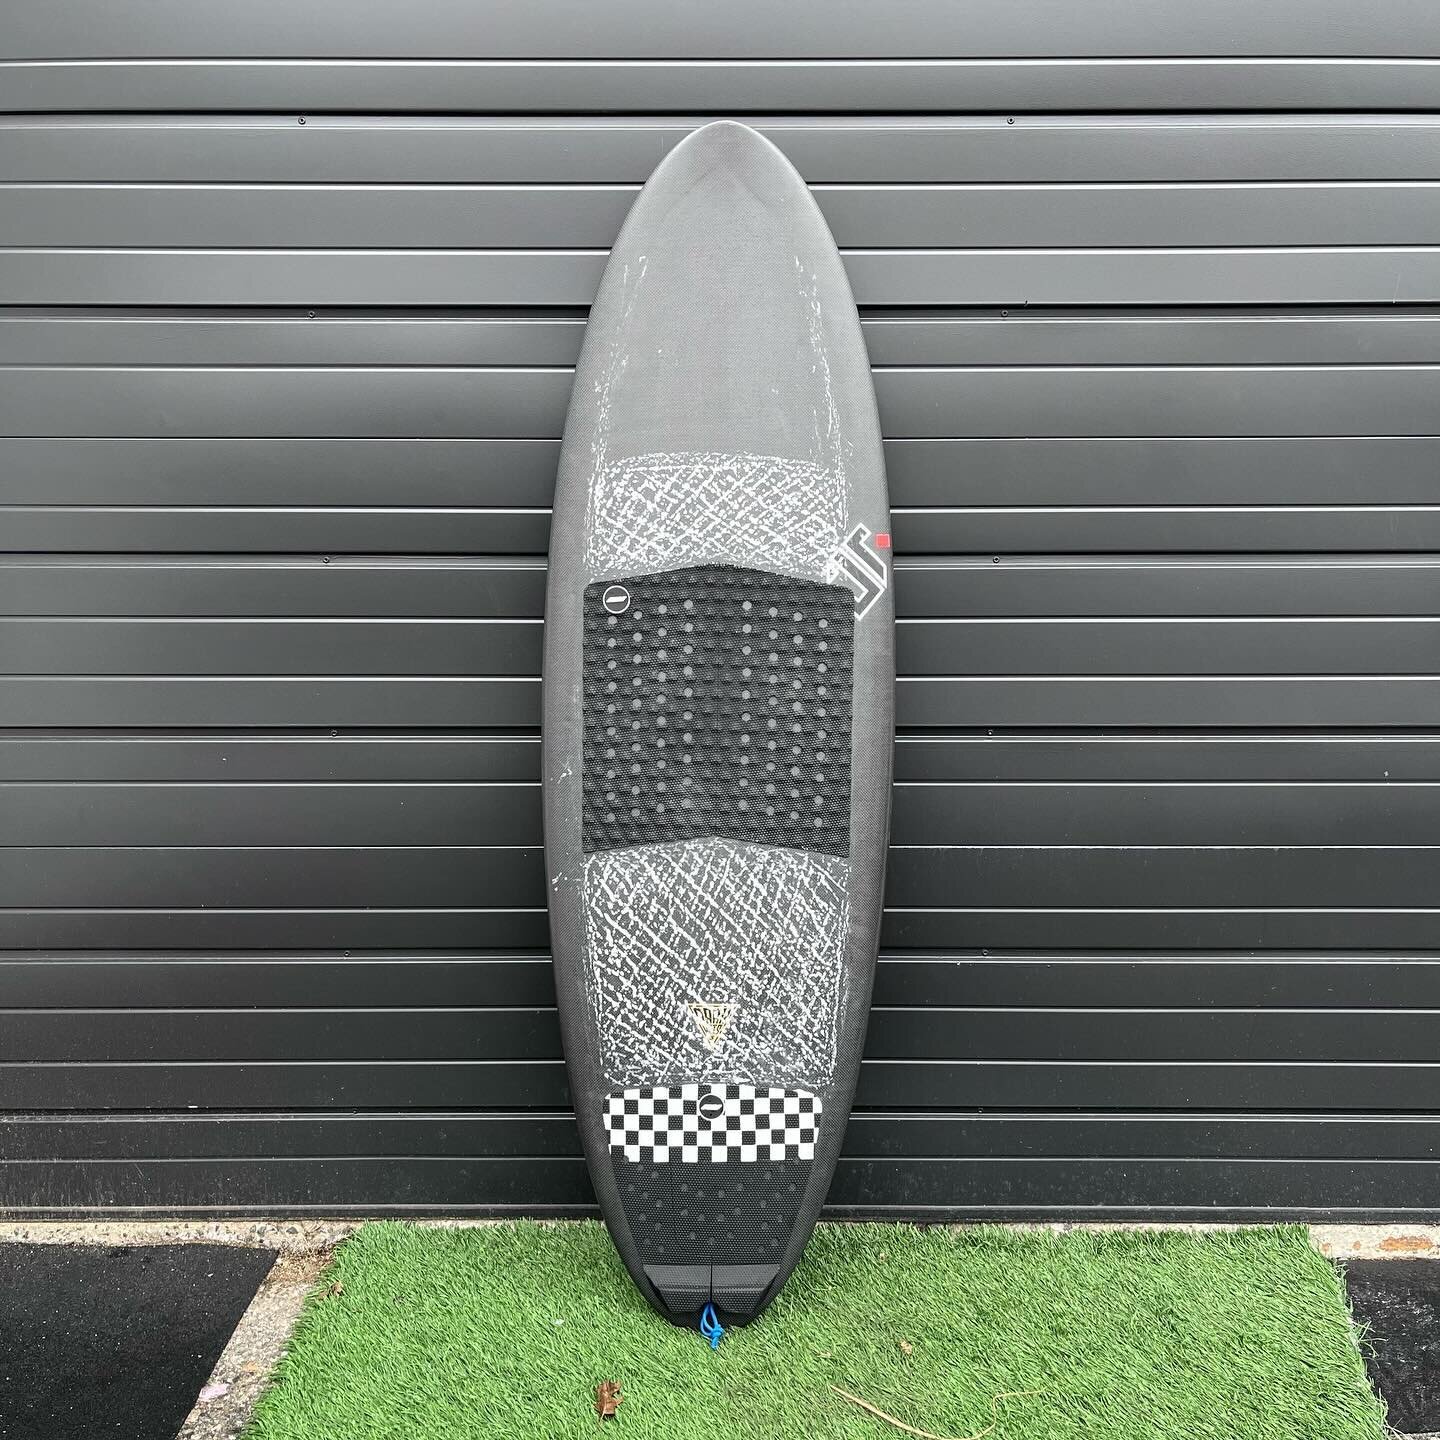 Used @jtsurfboards X @darkartssurf Deviled Egg
-
&ldquo;Performance in a tighter package&rdquo;
5&rsquo;6 x 20 1/16 x 2 5/8 @ 32.7 Liters
-$649-